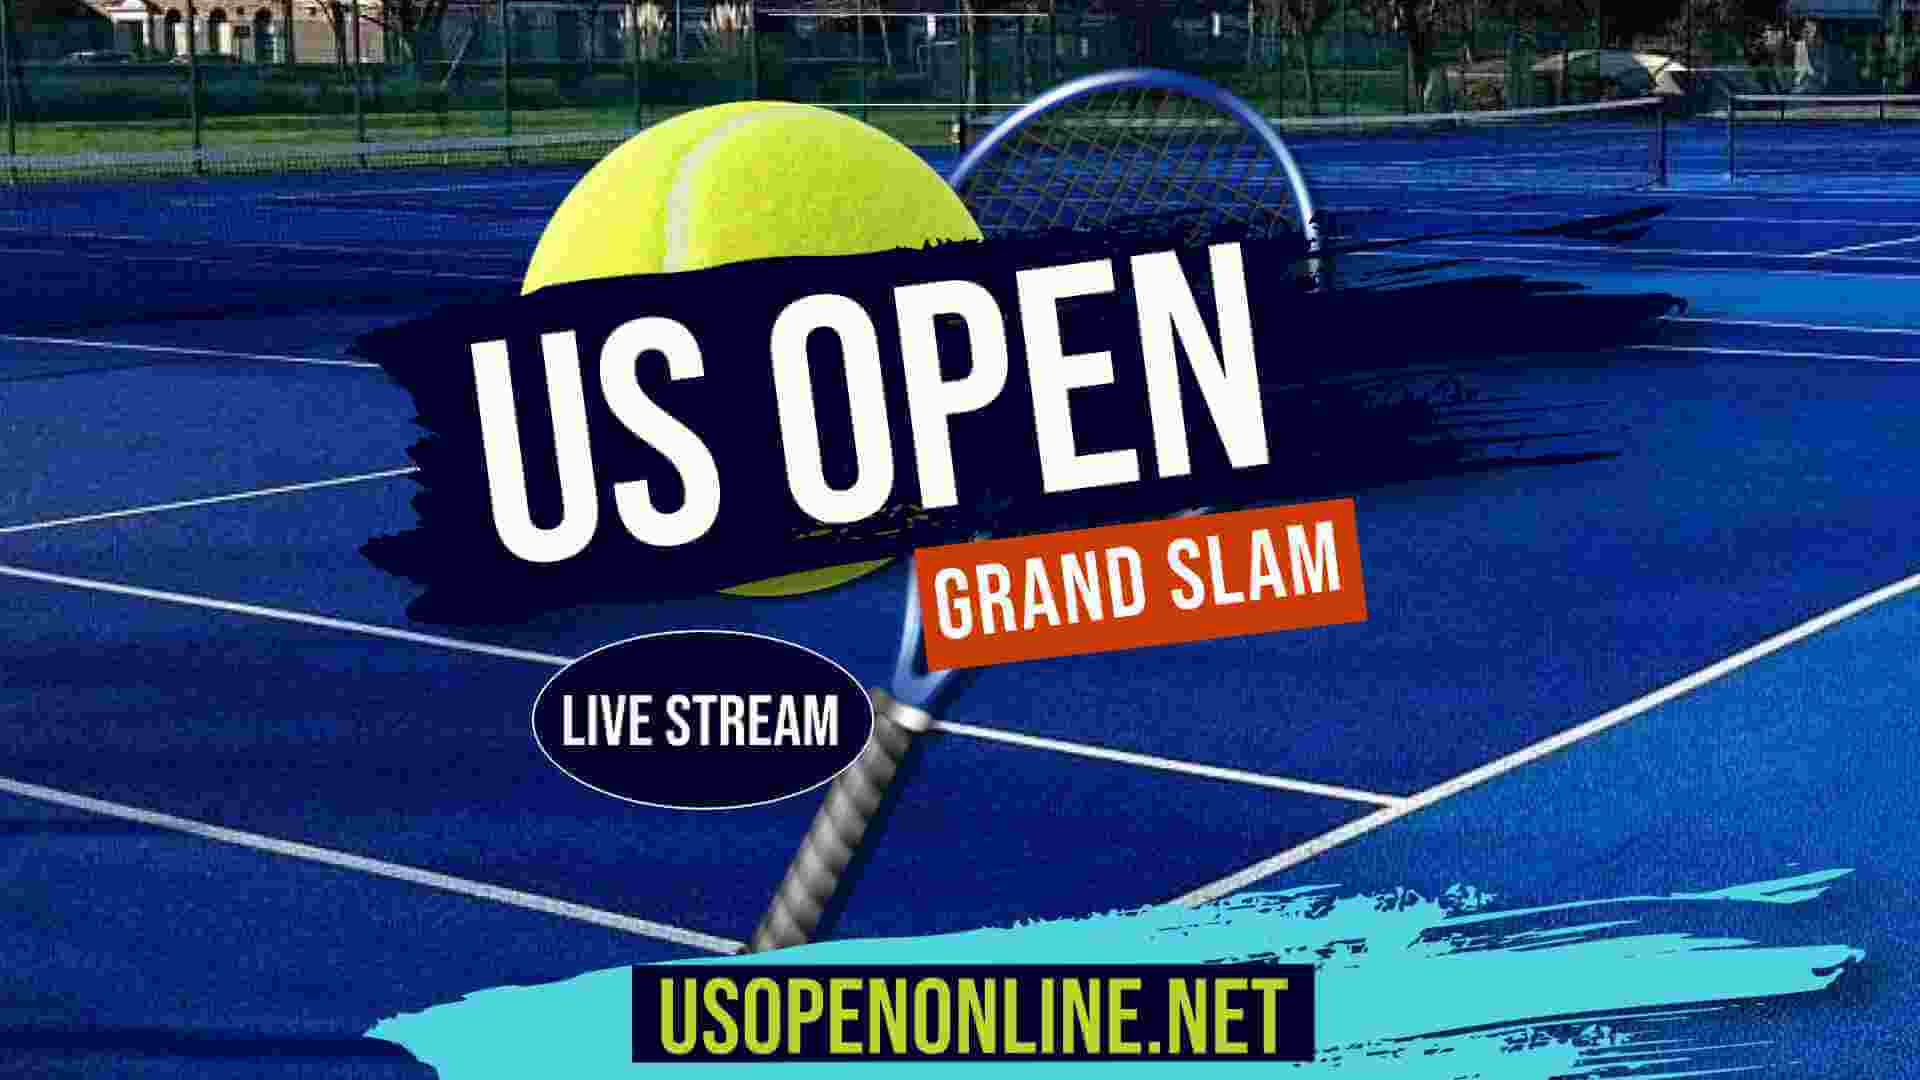 Men Singles 3rd Round 2018 US Open Streaming